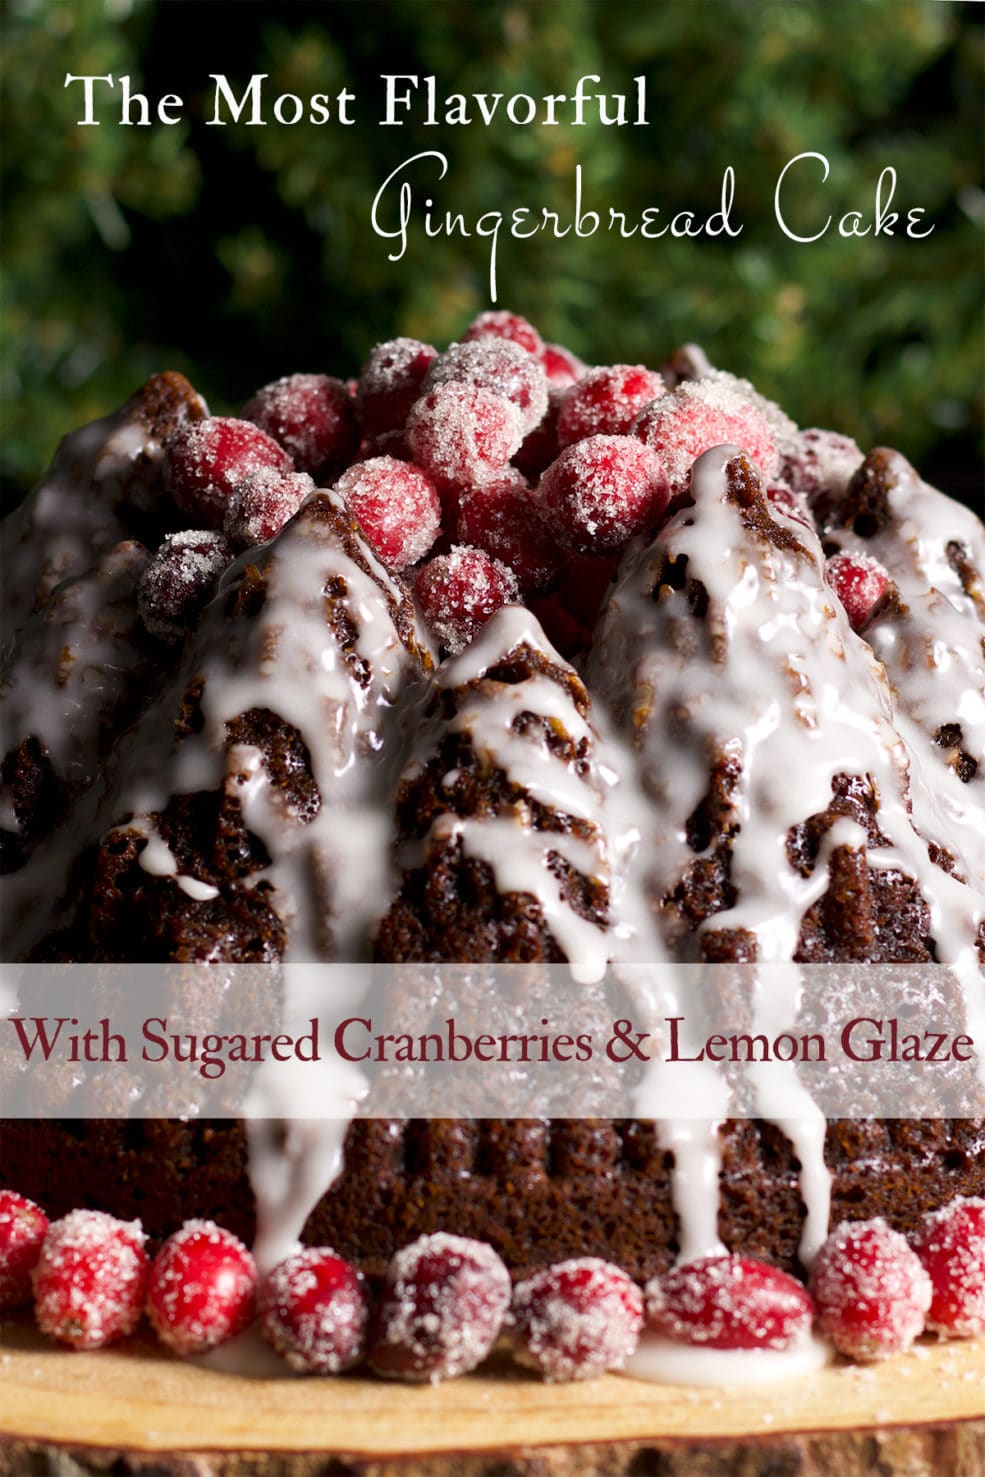 A Gingerbread Bundt Cake covered in sugared cranberries and lemon glaze on a wood serving platter, ready to serve.